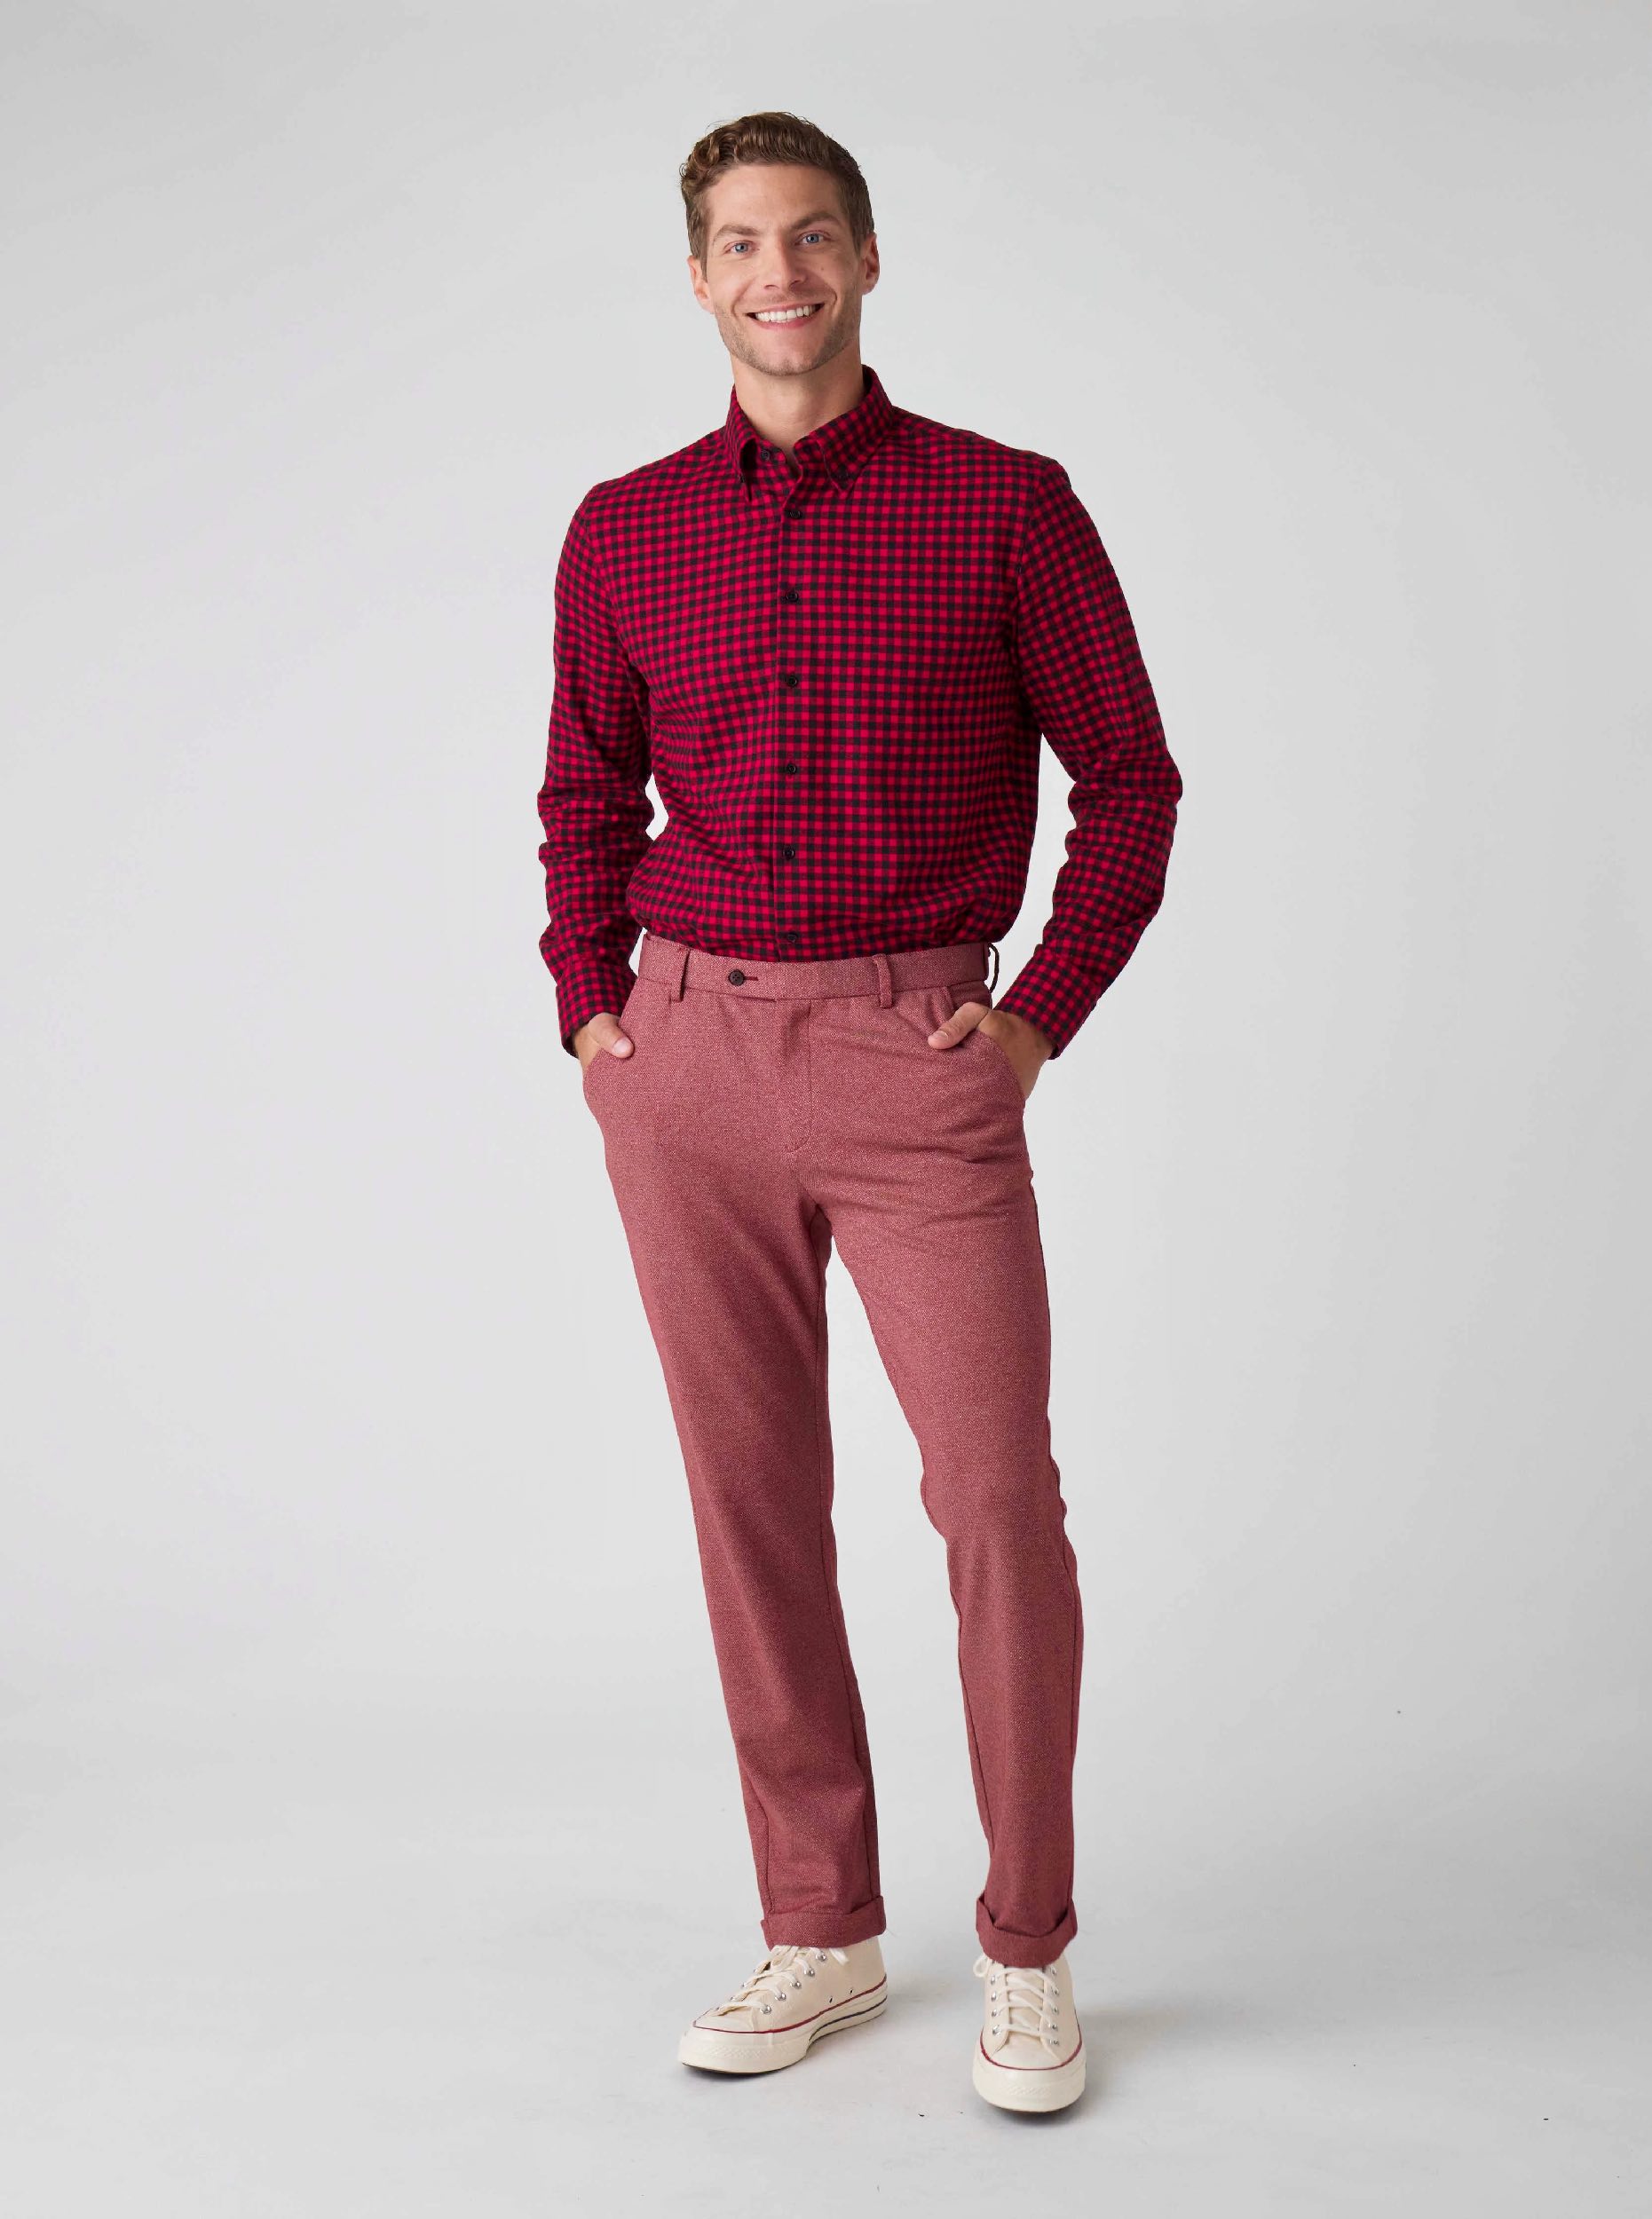 Dark Red & Maroon Pants For Guy's With Shirts Combination Outfits Ideas  2022 | Red pants men, Red pants outfit, Red chinos men